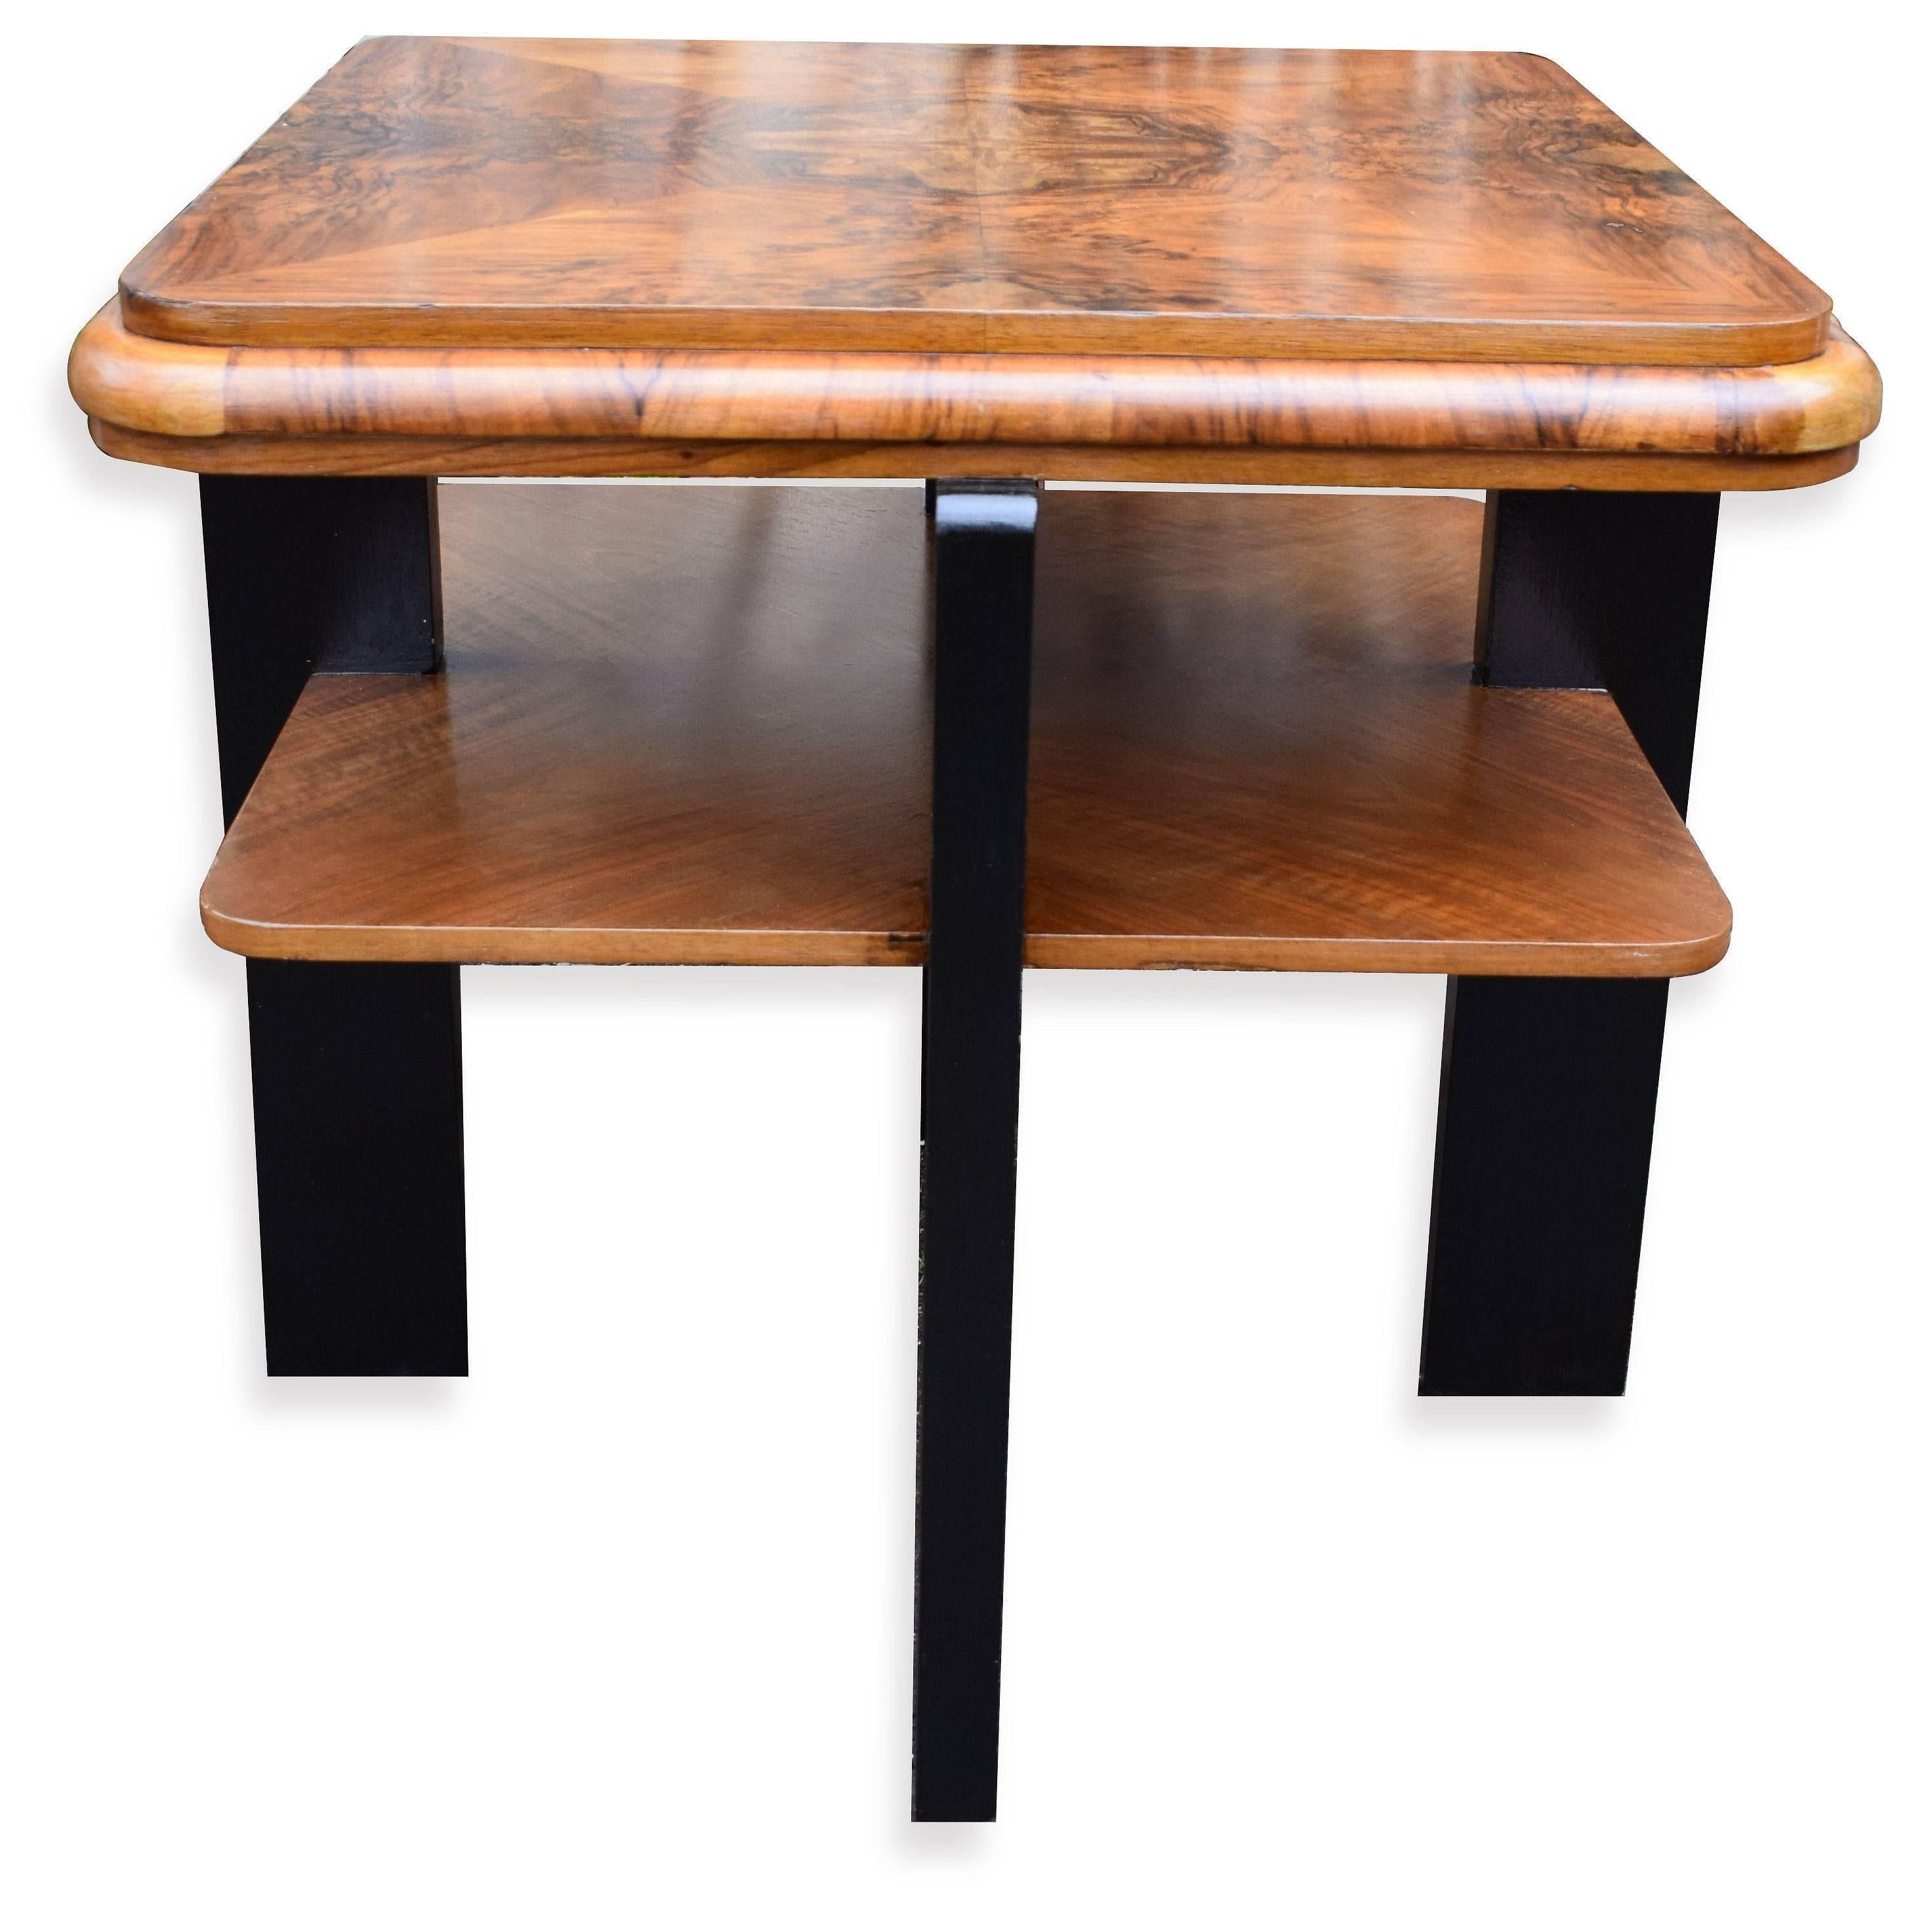 English Superb 1930s Art Deco Two-Tier Occasional Table in Walnut